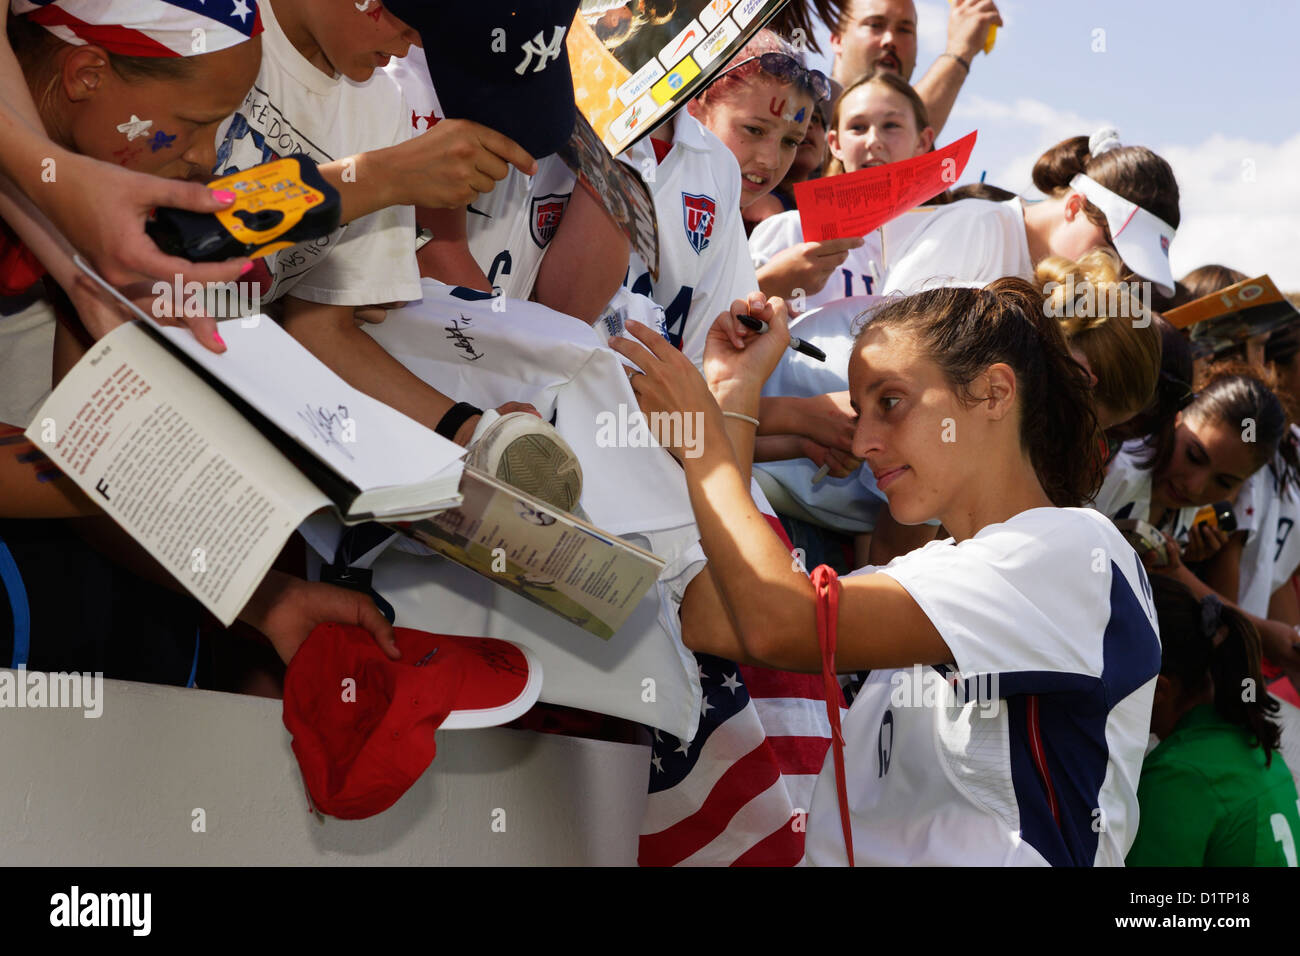 United States National Team soccer player Kate Markgraf signs autographs for young fans after a friendly match against Mexico. Stock Photo